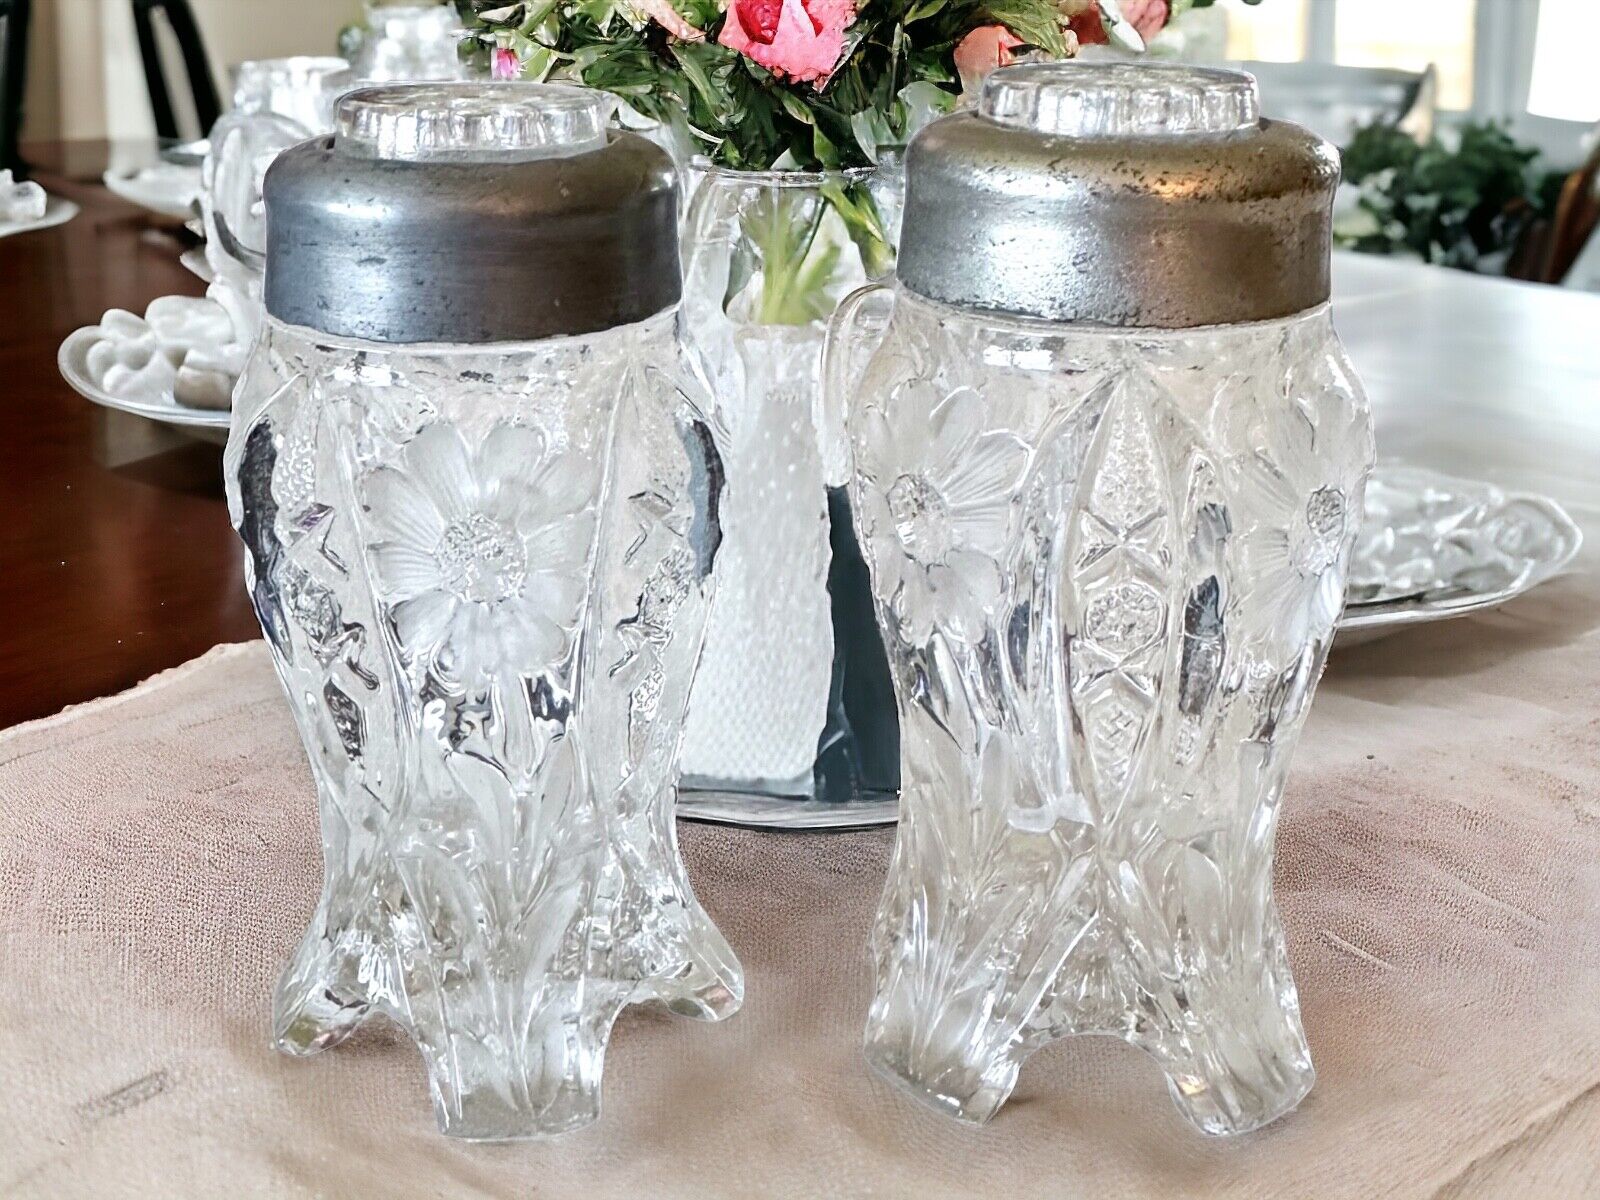 Vintage Heavy Cut Glass Salt and Pepper Shakers circa 1970s